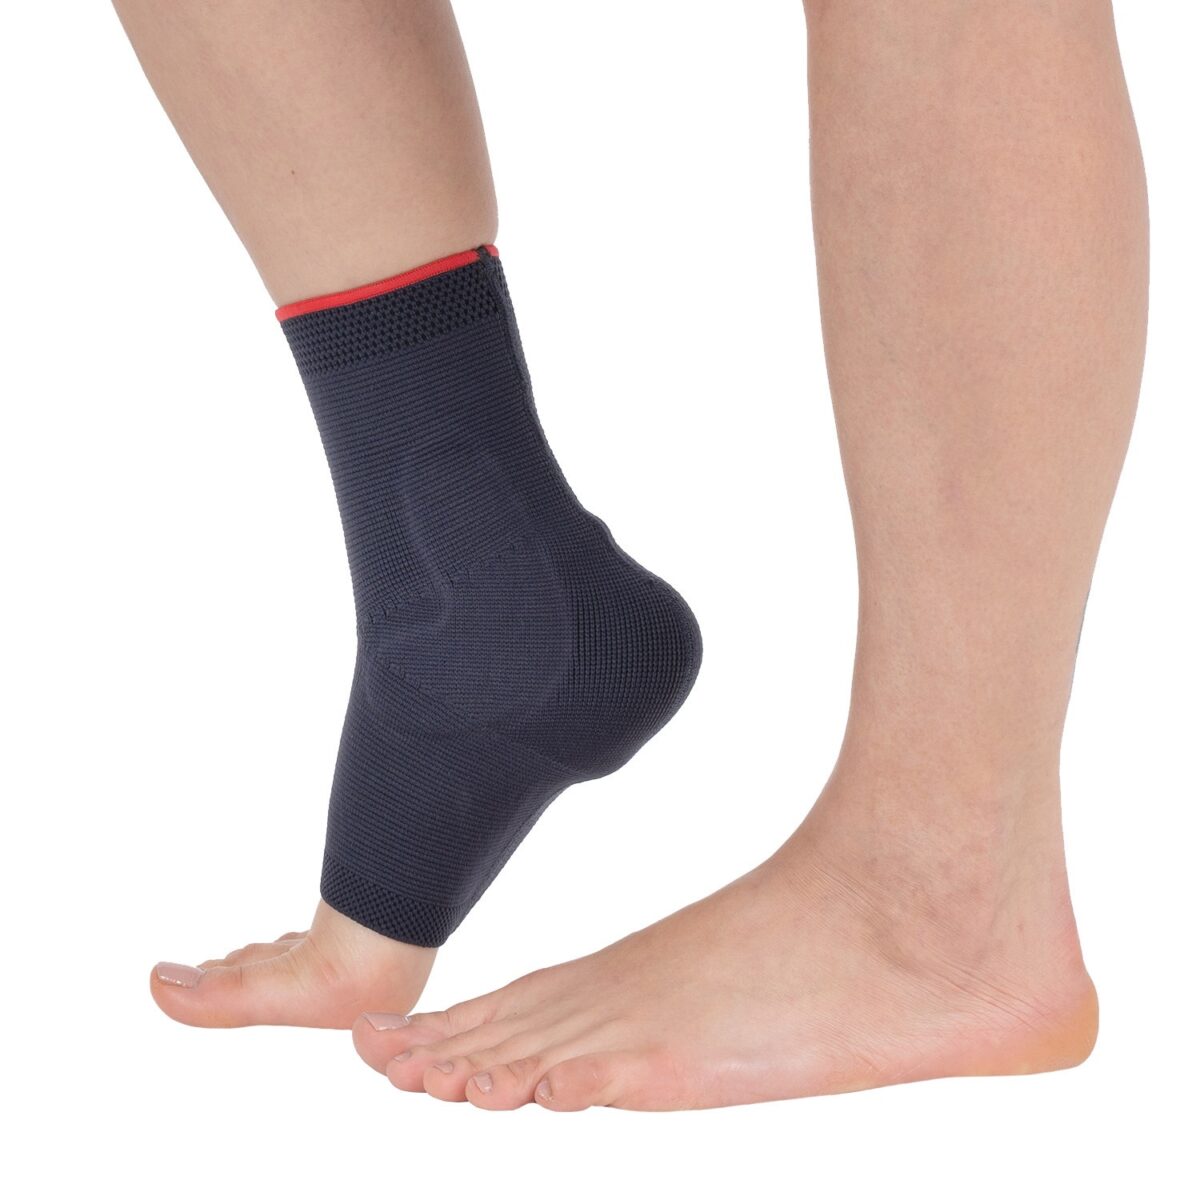 wingmed orthopedic equipments W604 woven malleol ankle support 18 2